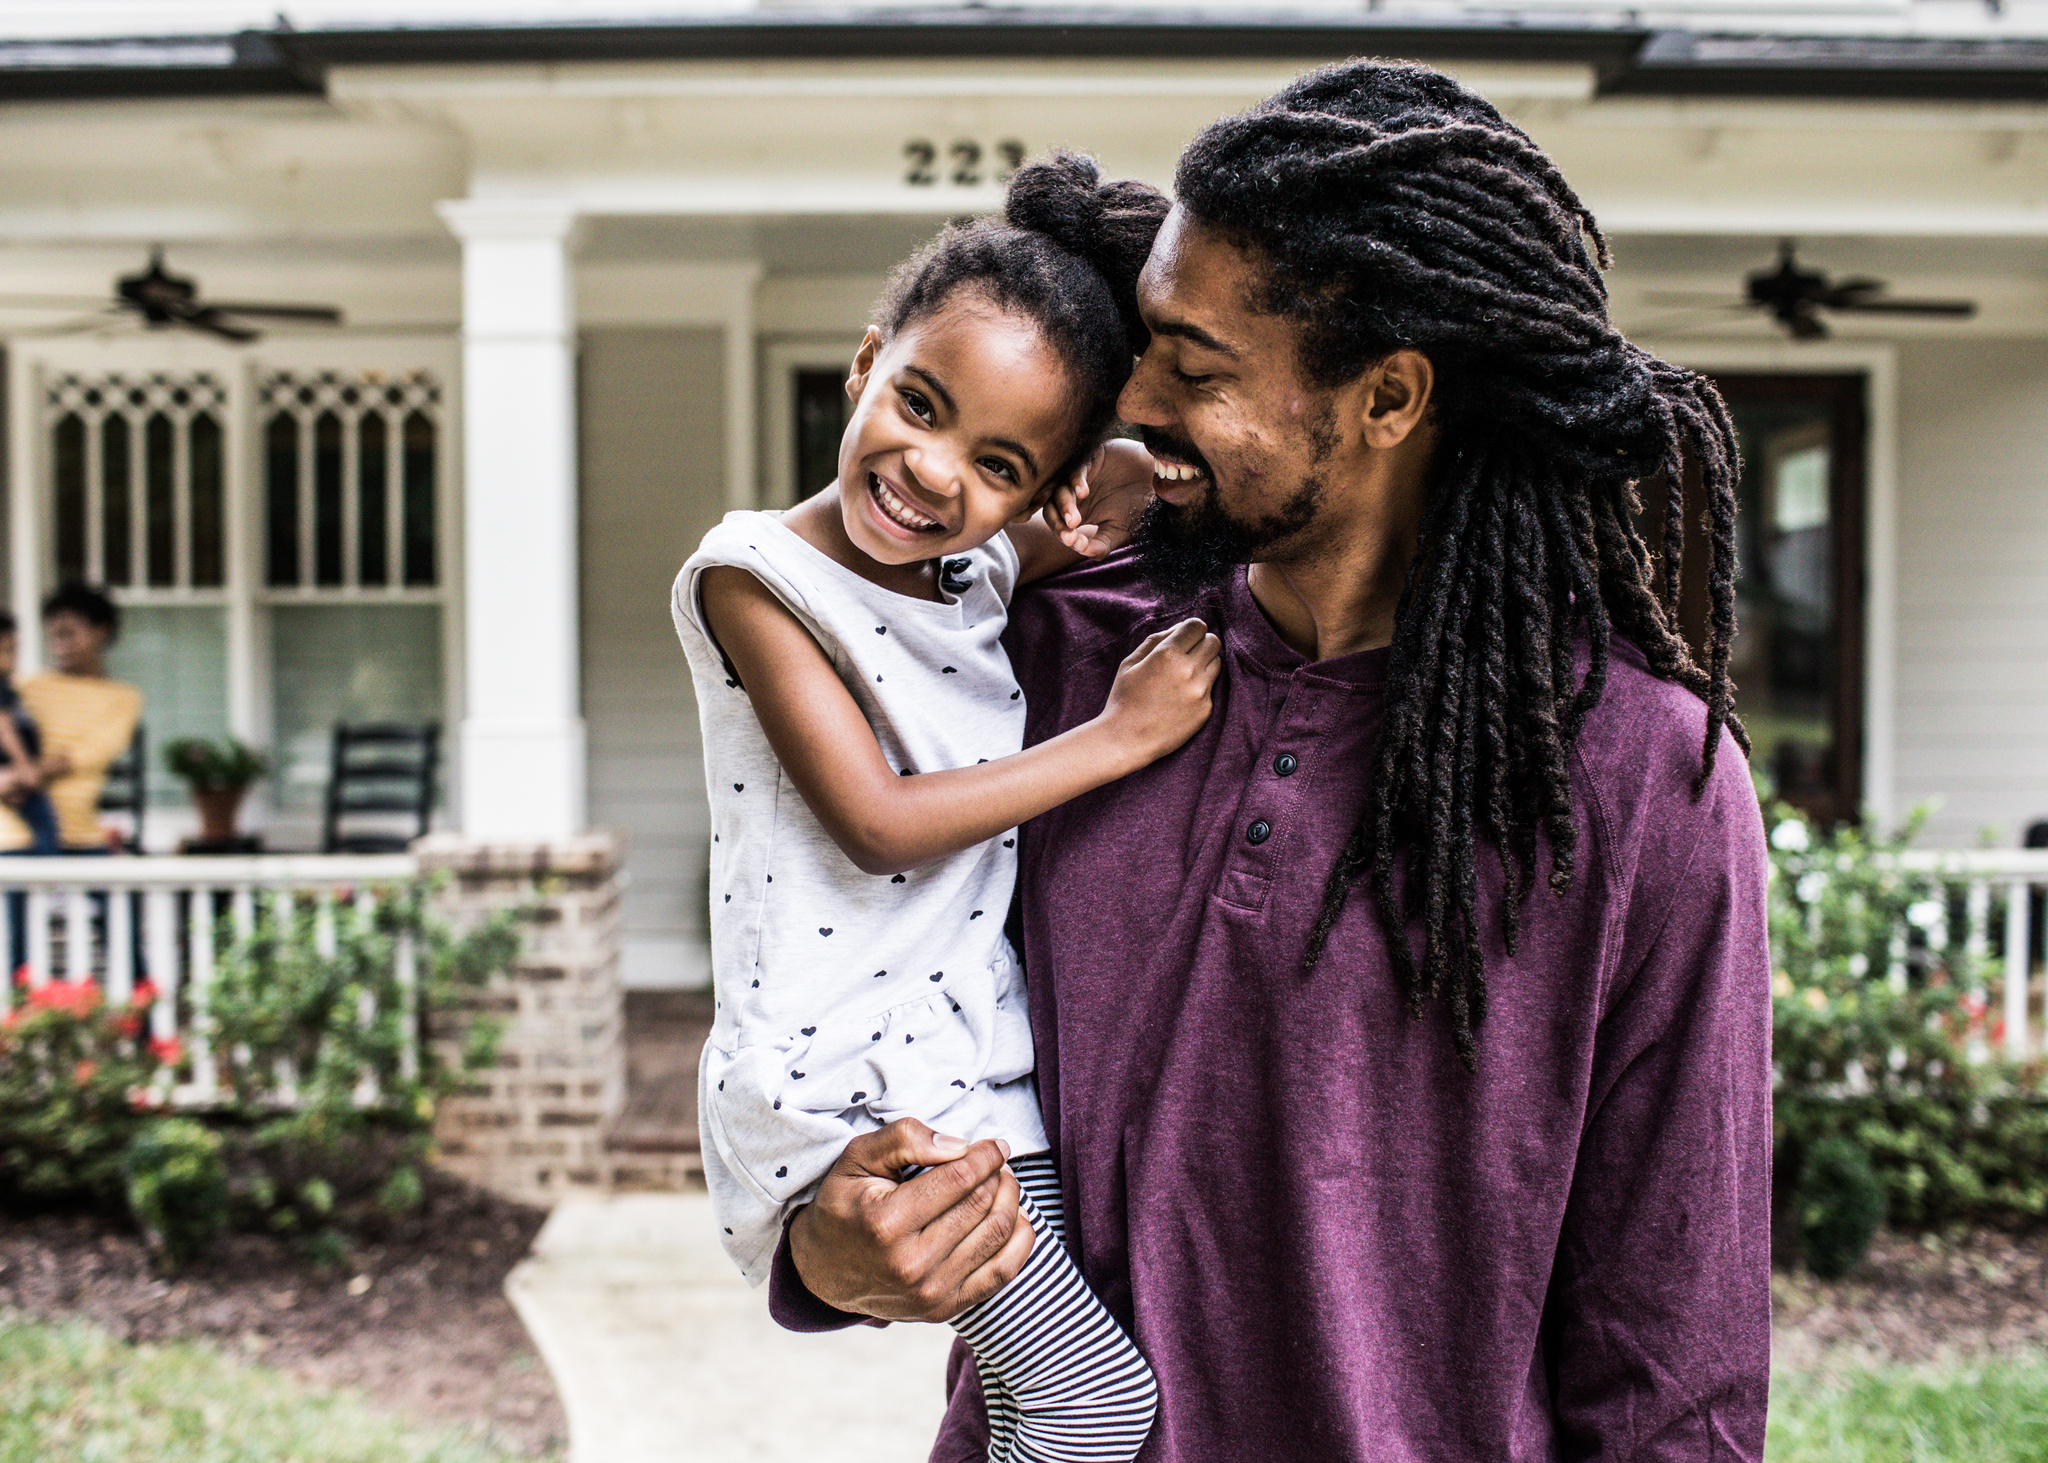 Father holding young daughter, both smiling, with a house and another person in the background